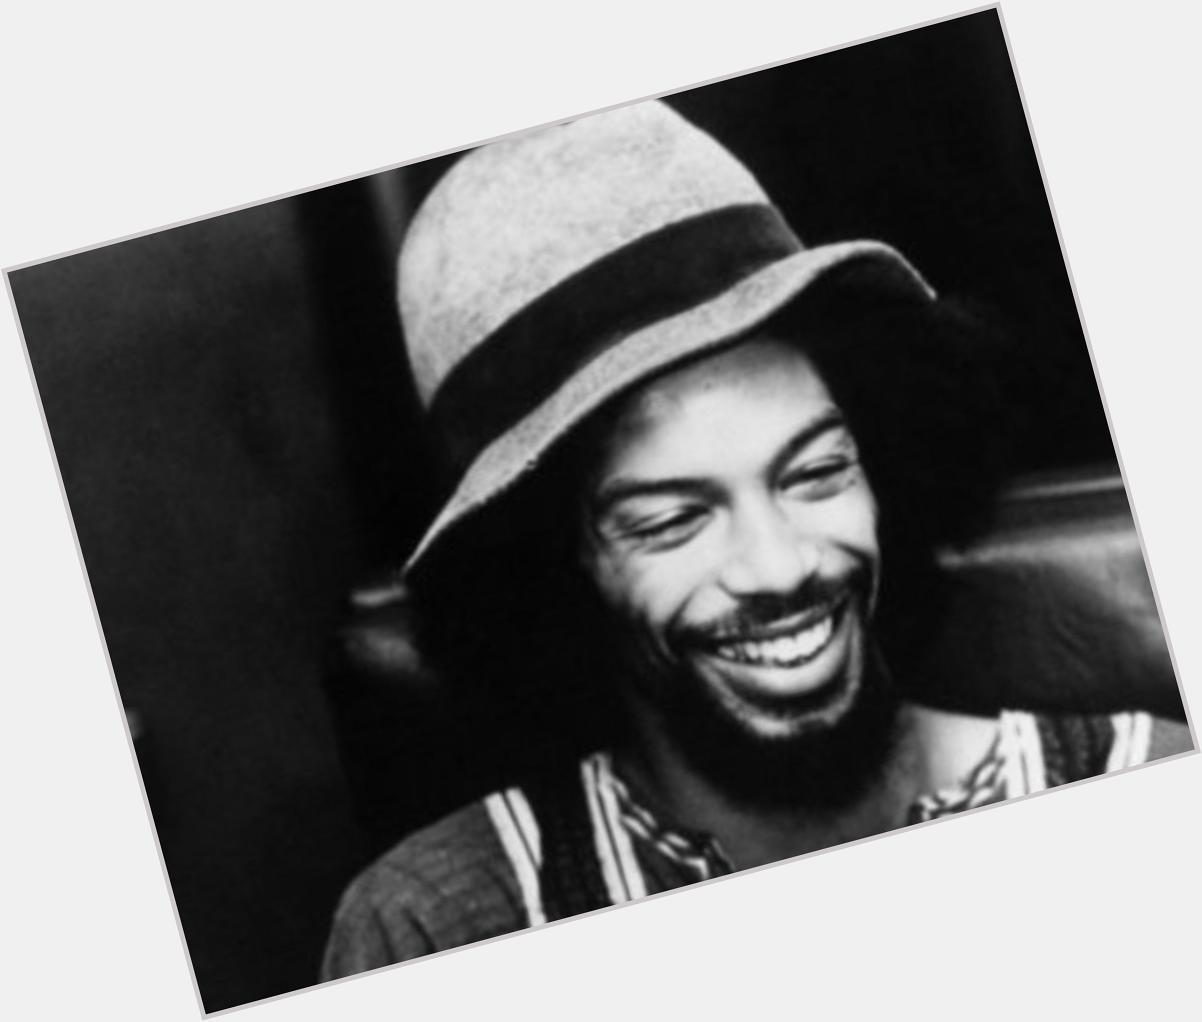   Happy Birthday for yesterday to the late great Gil Scott Heron 

 